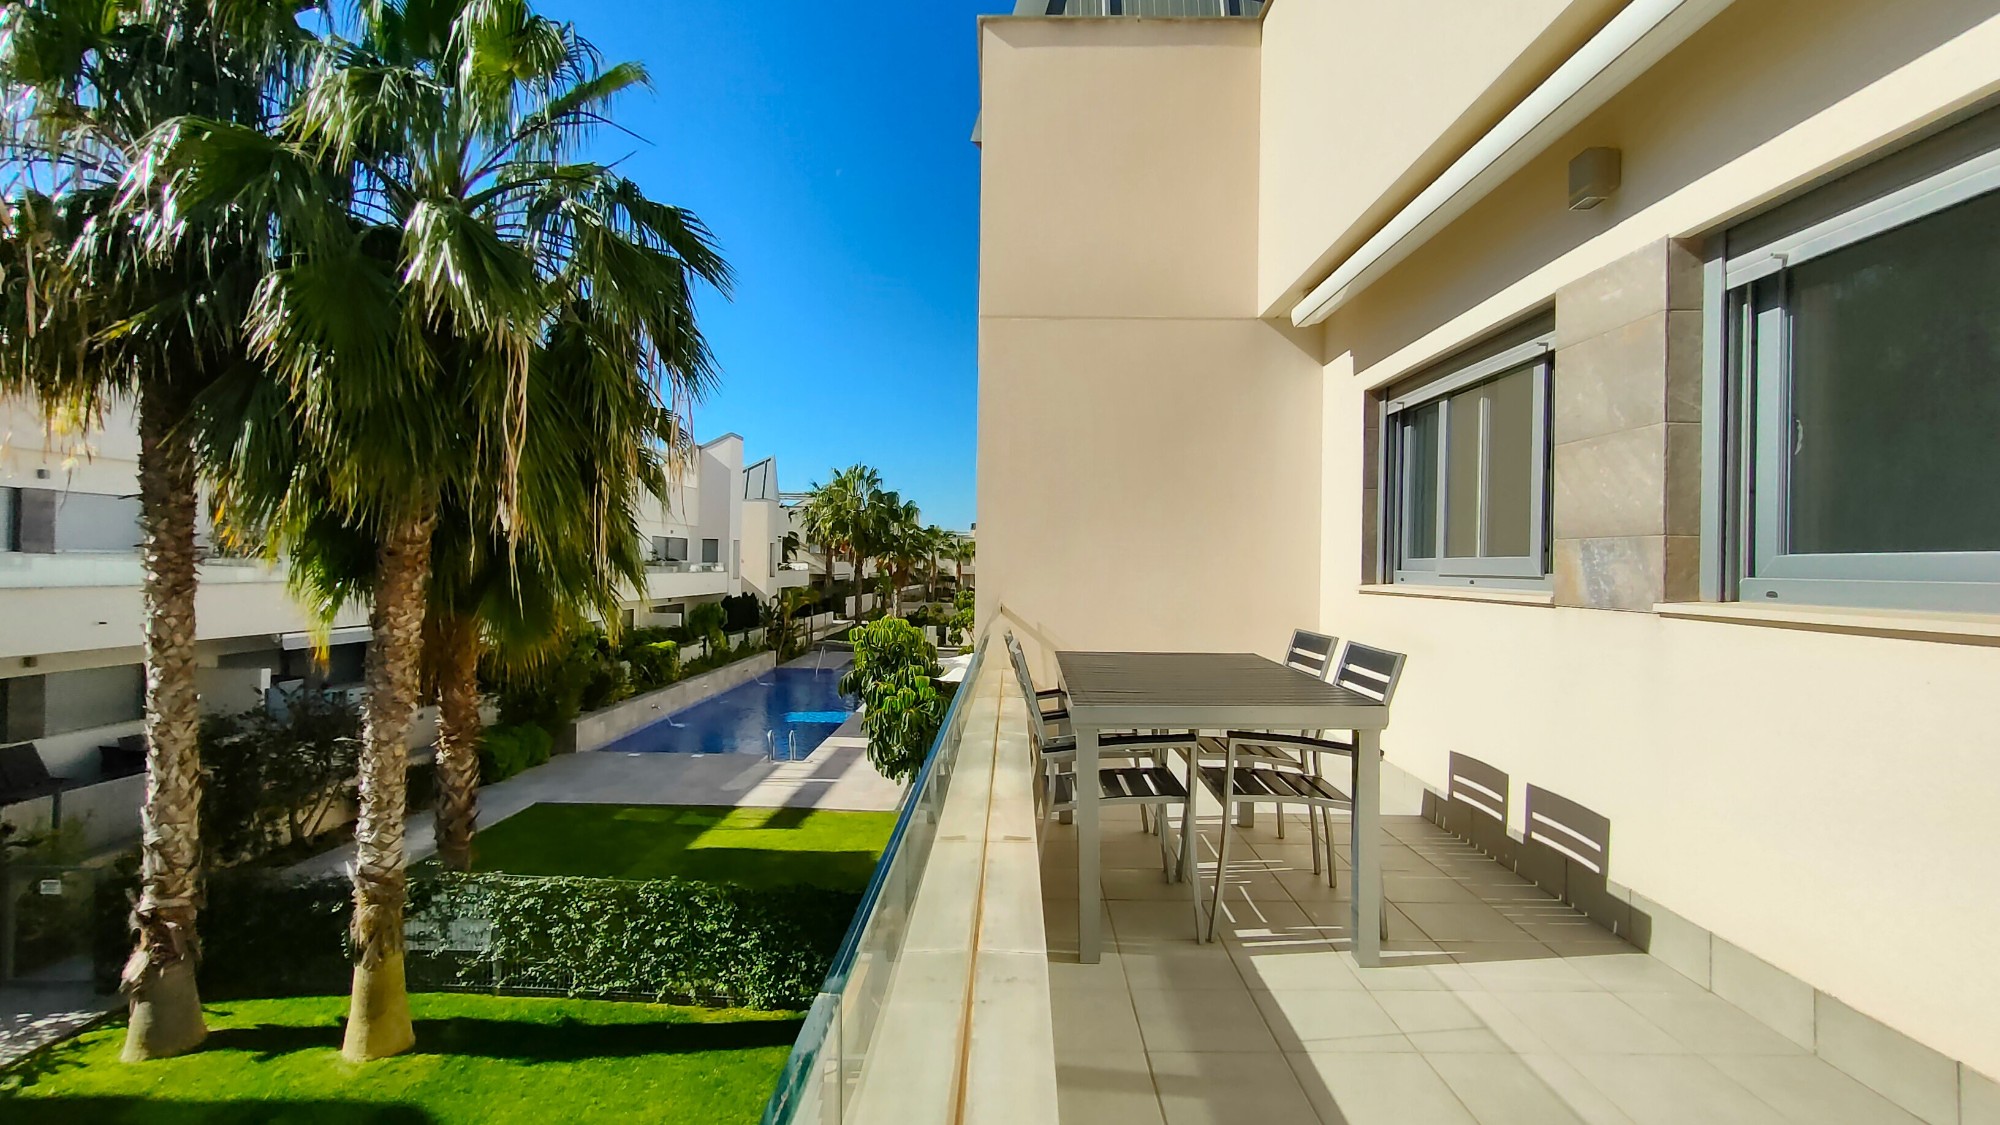 Property Image 606586-torrevieja-apartment-2-2